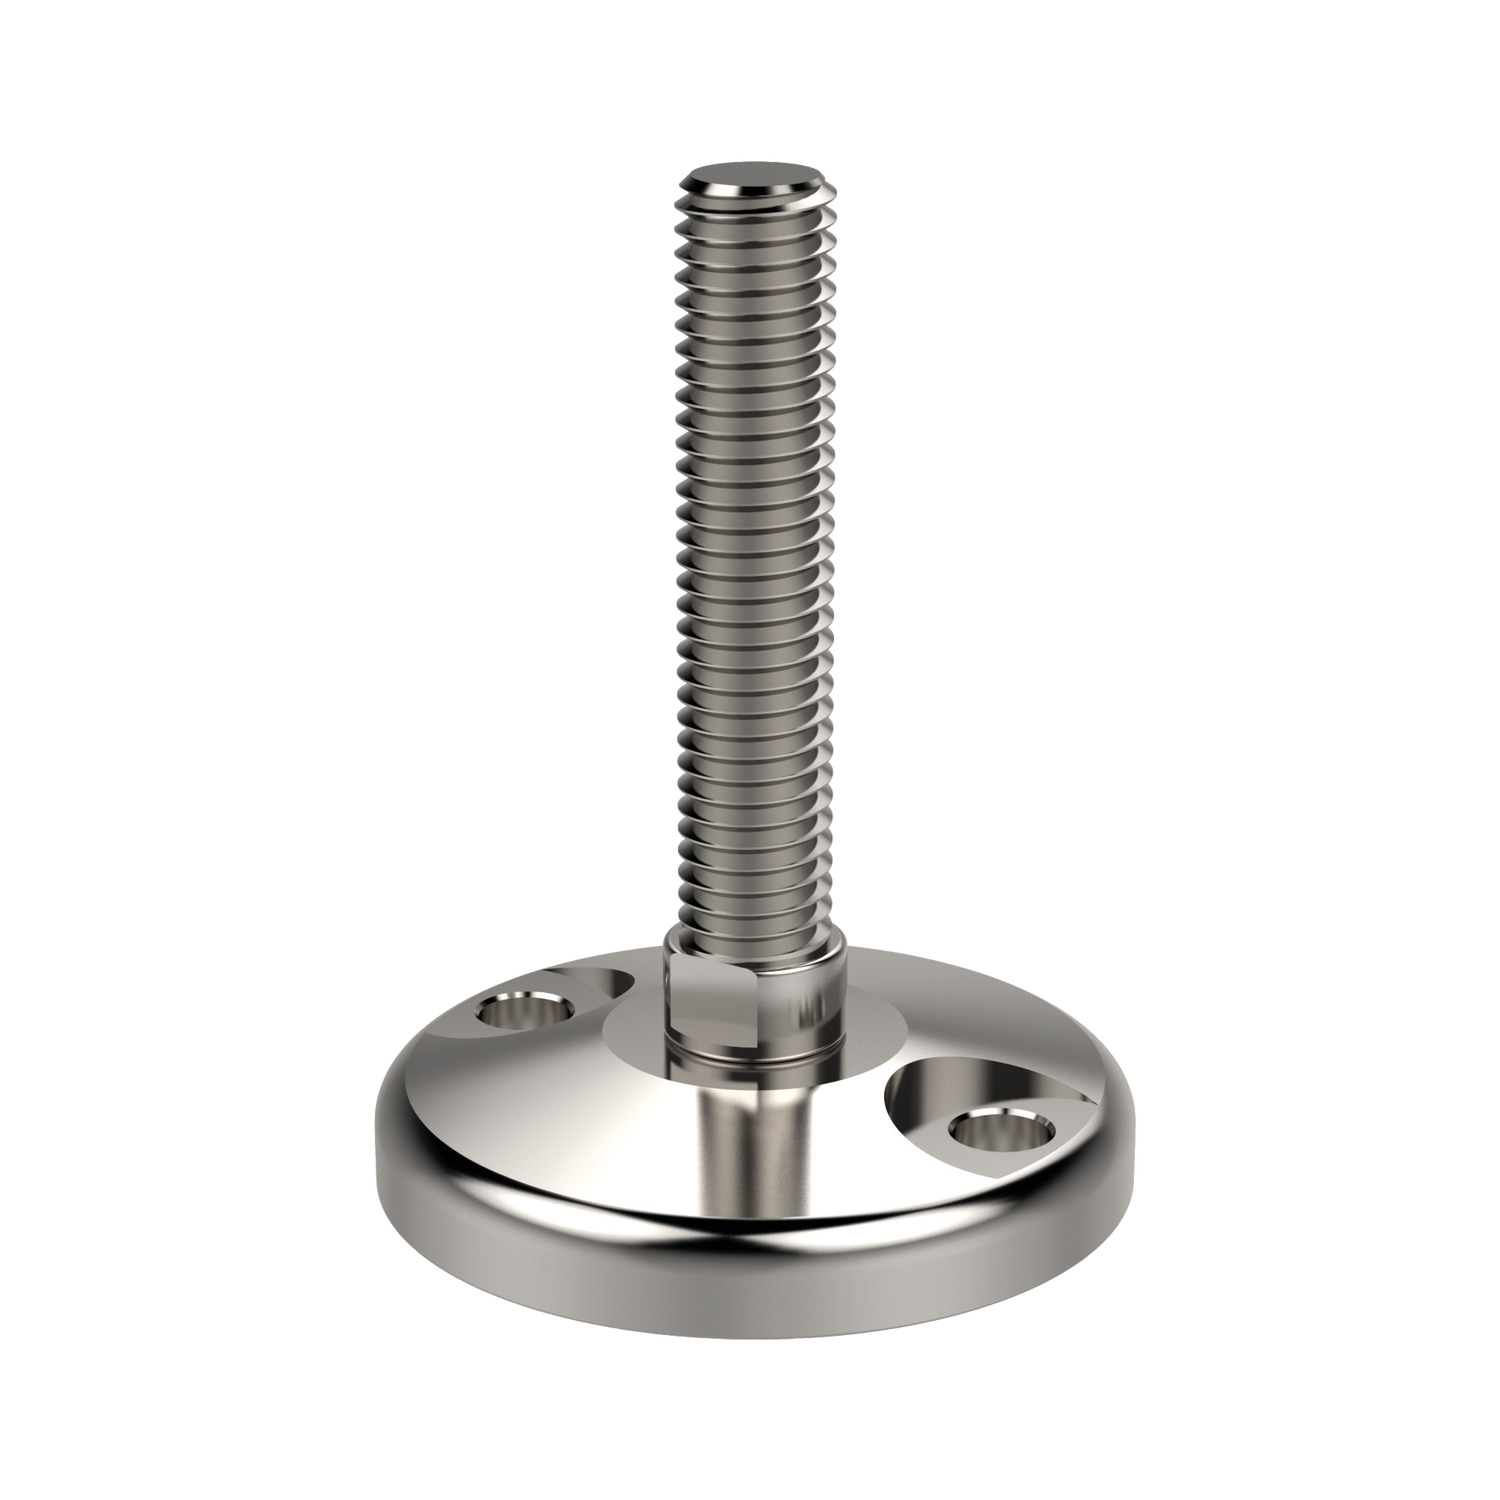 Product 34718, Levelling Feet - Bolt Down stainless steel, heavy duty / 